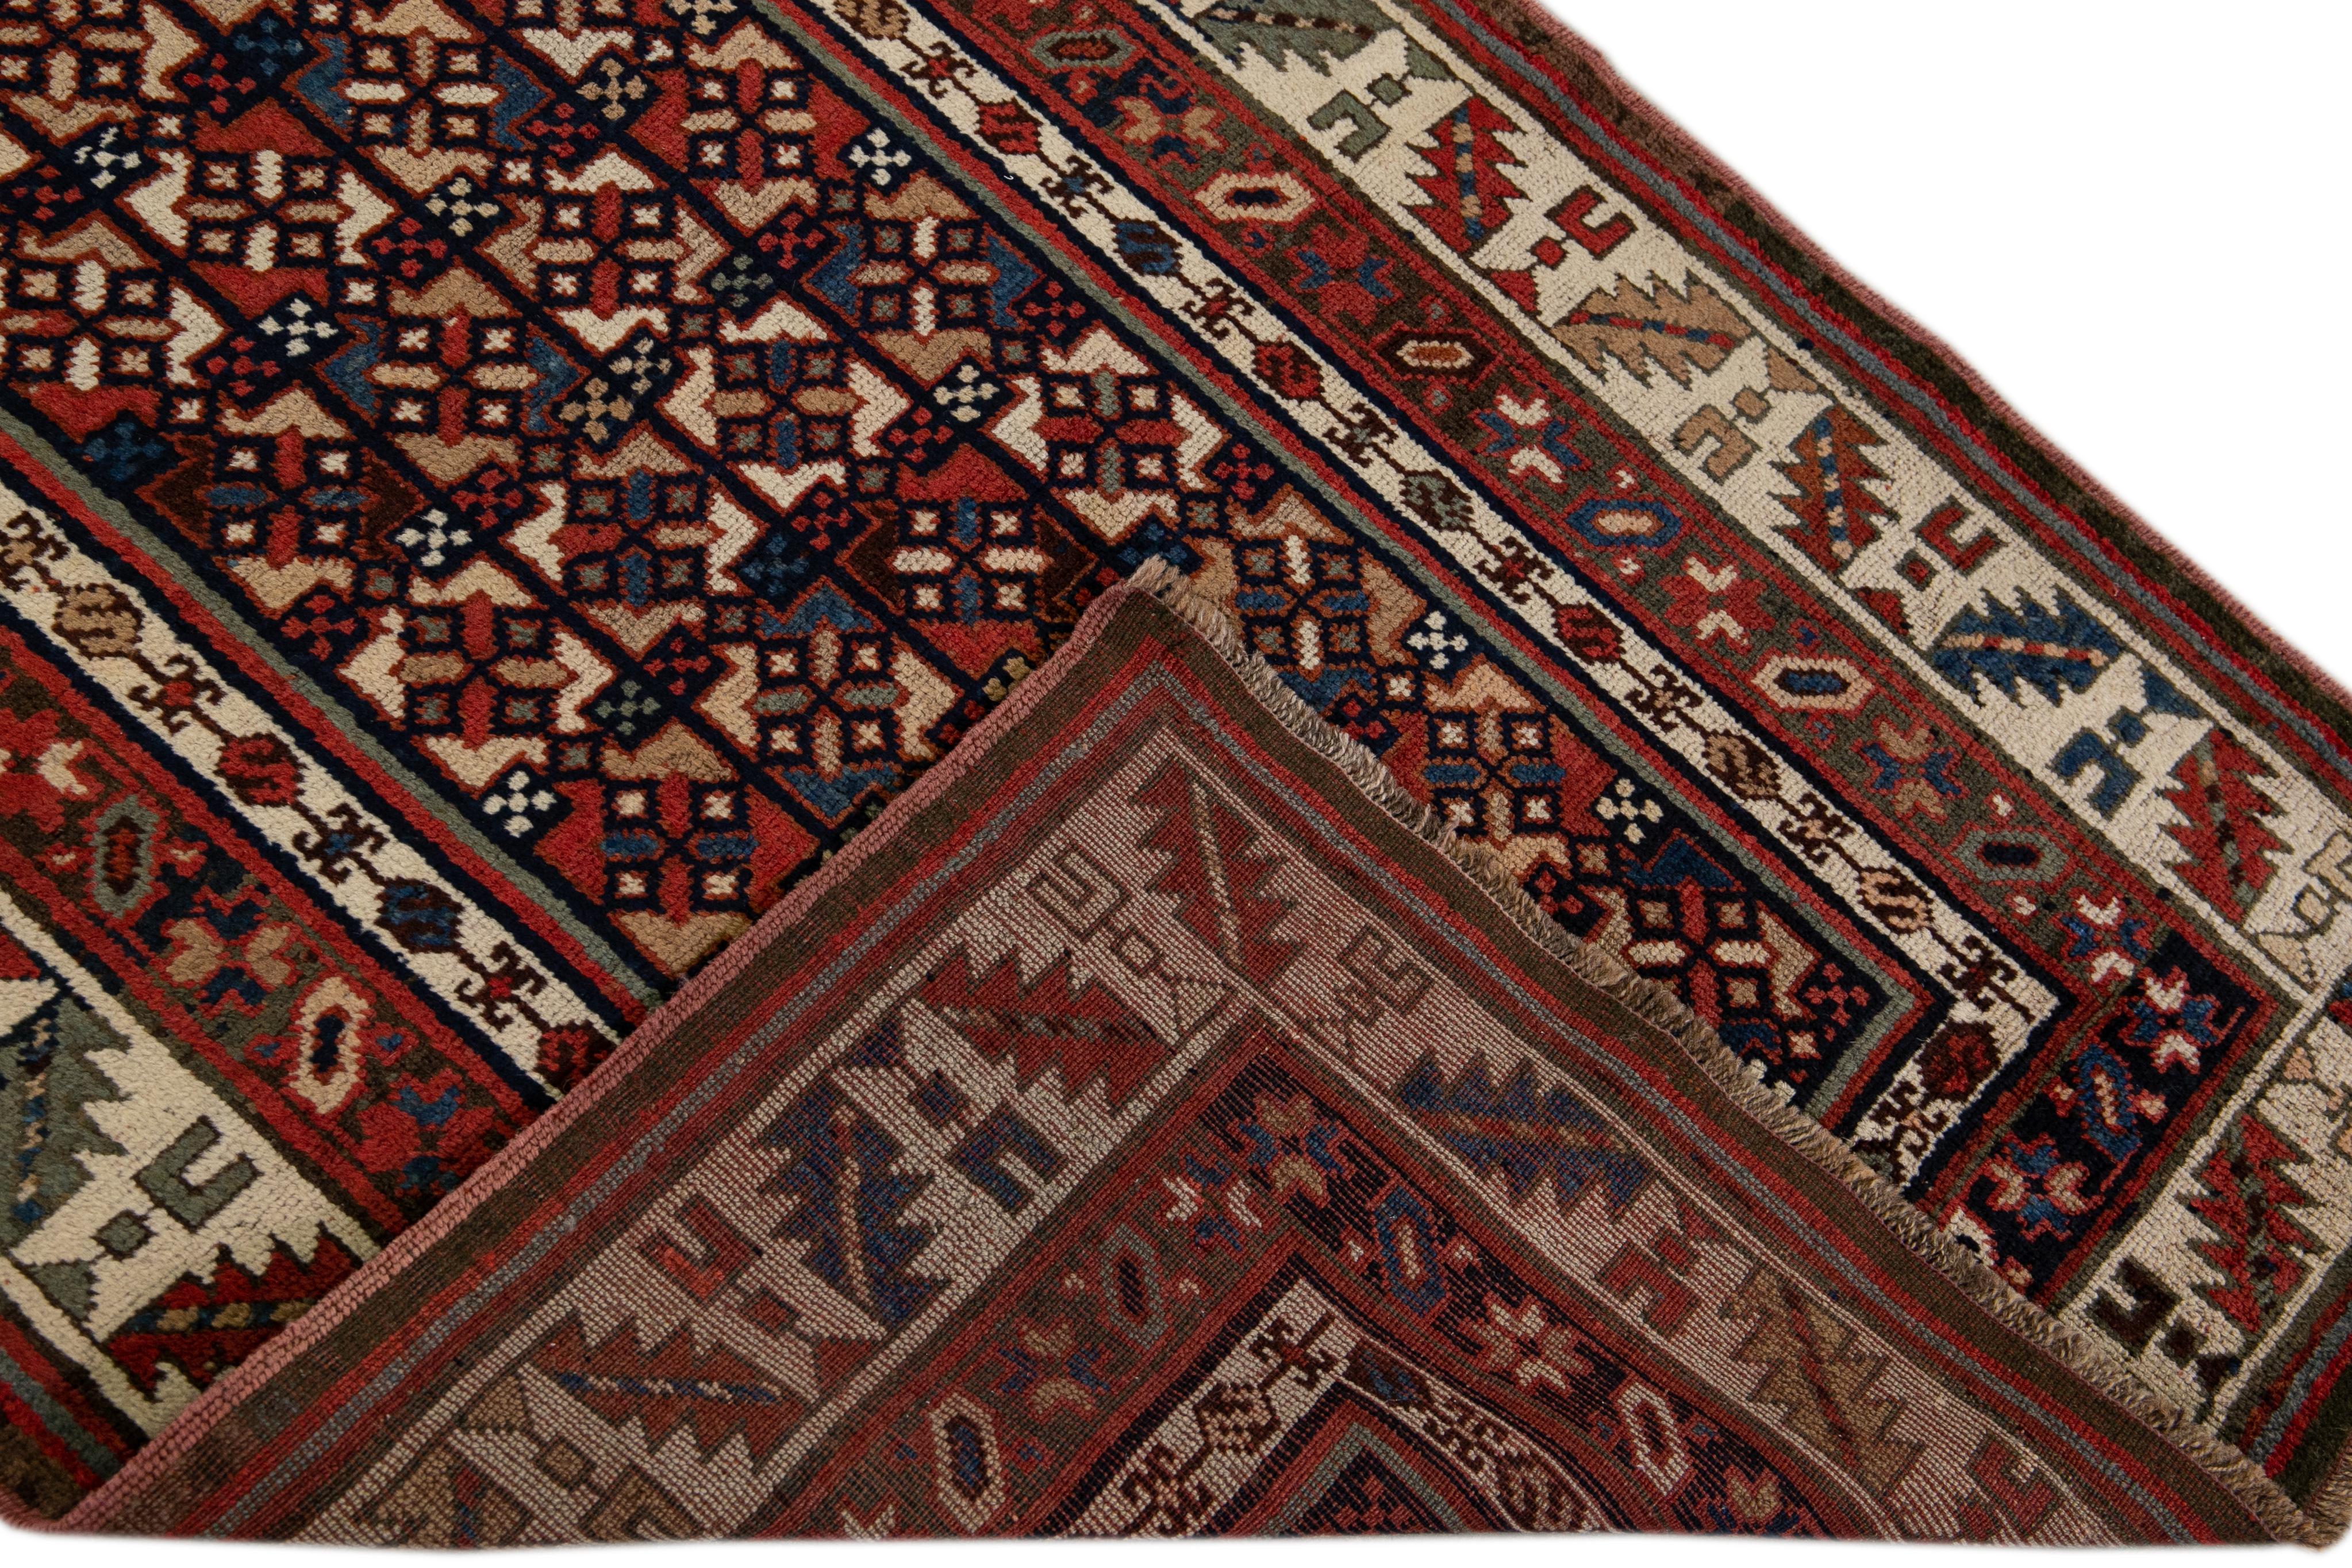 Beautiful Kurdish hand-knotted wool runner with a geometric design on a red field. Accents of blue, beige, and green throughout the piece. 

This rug measures 3'1